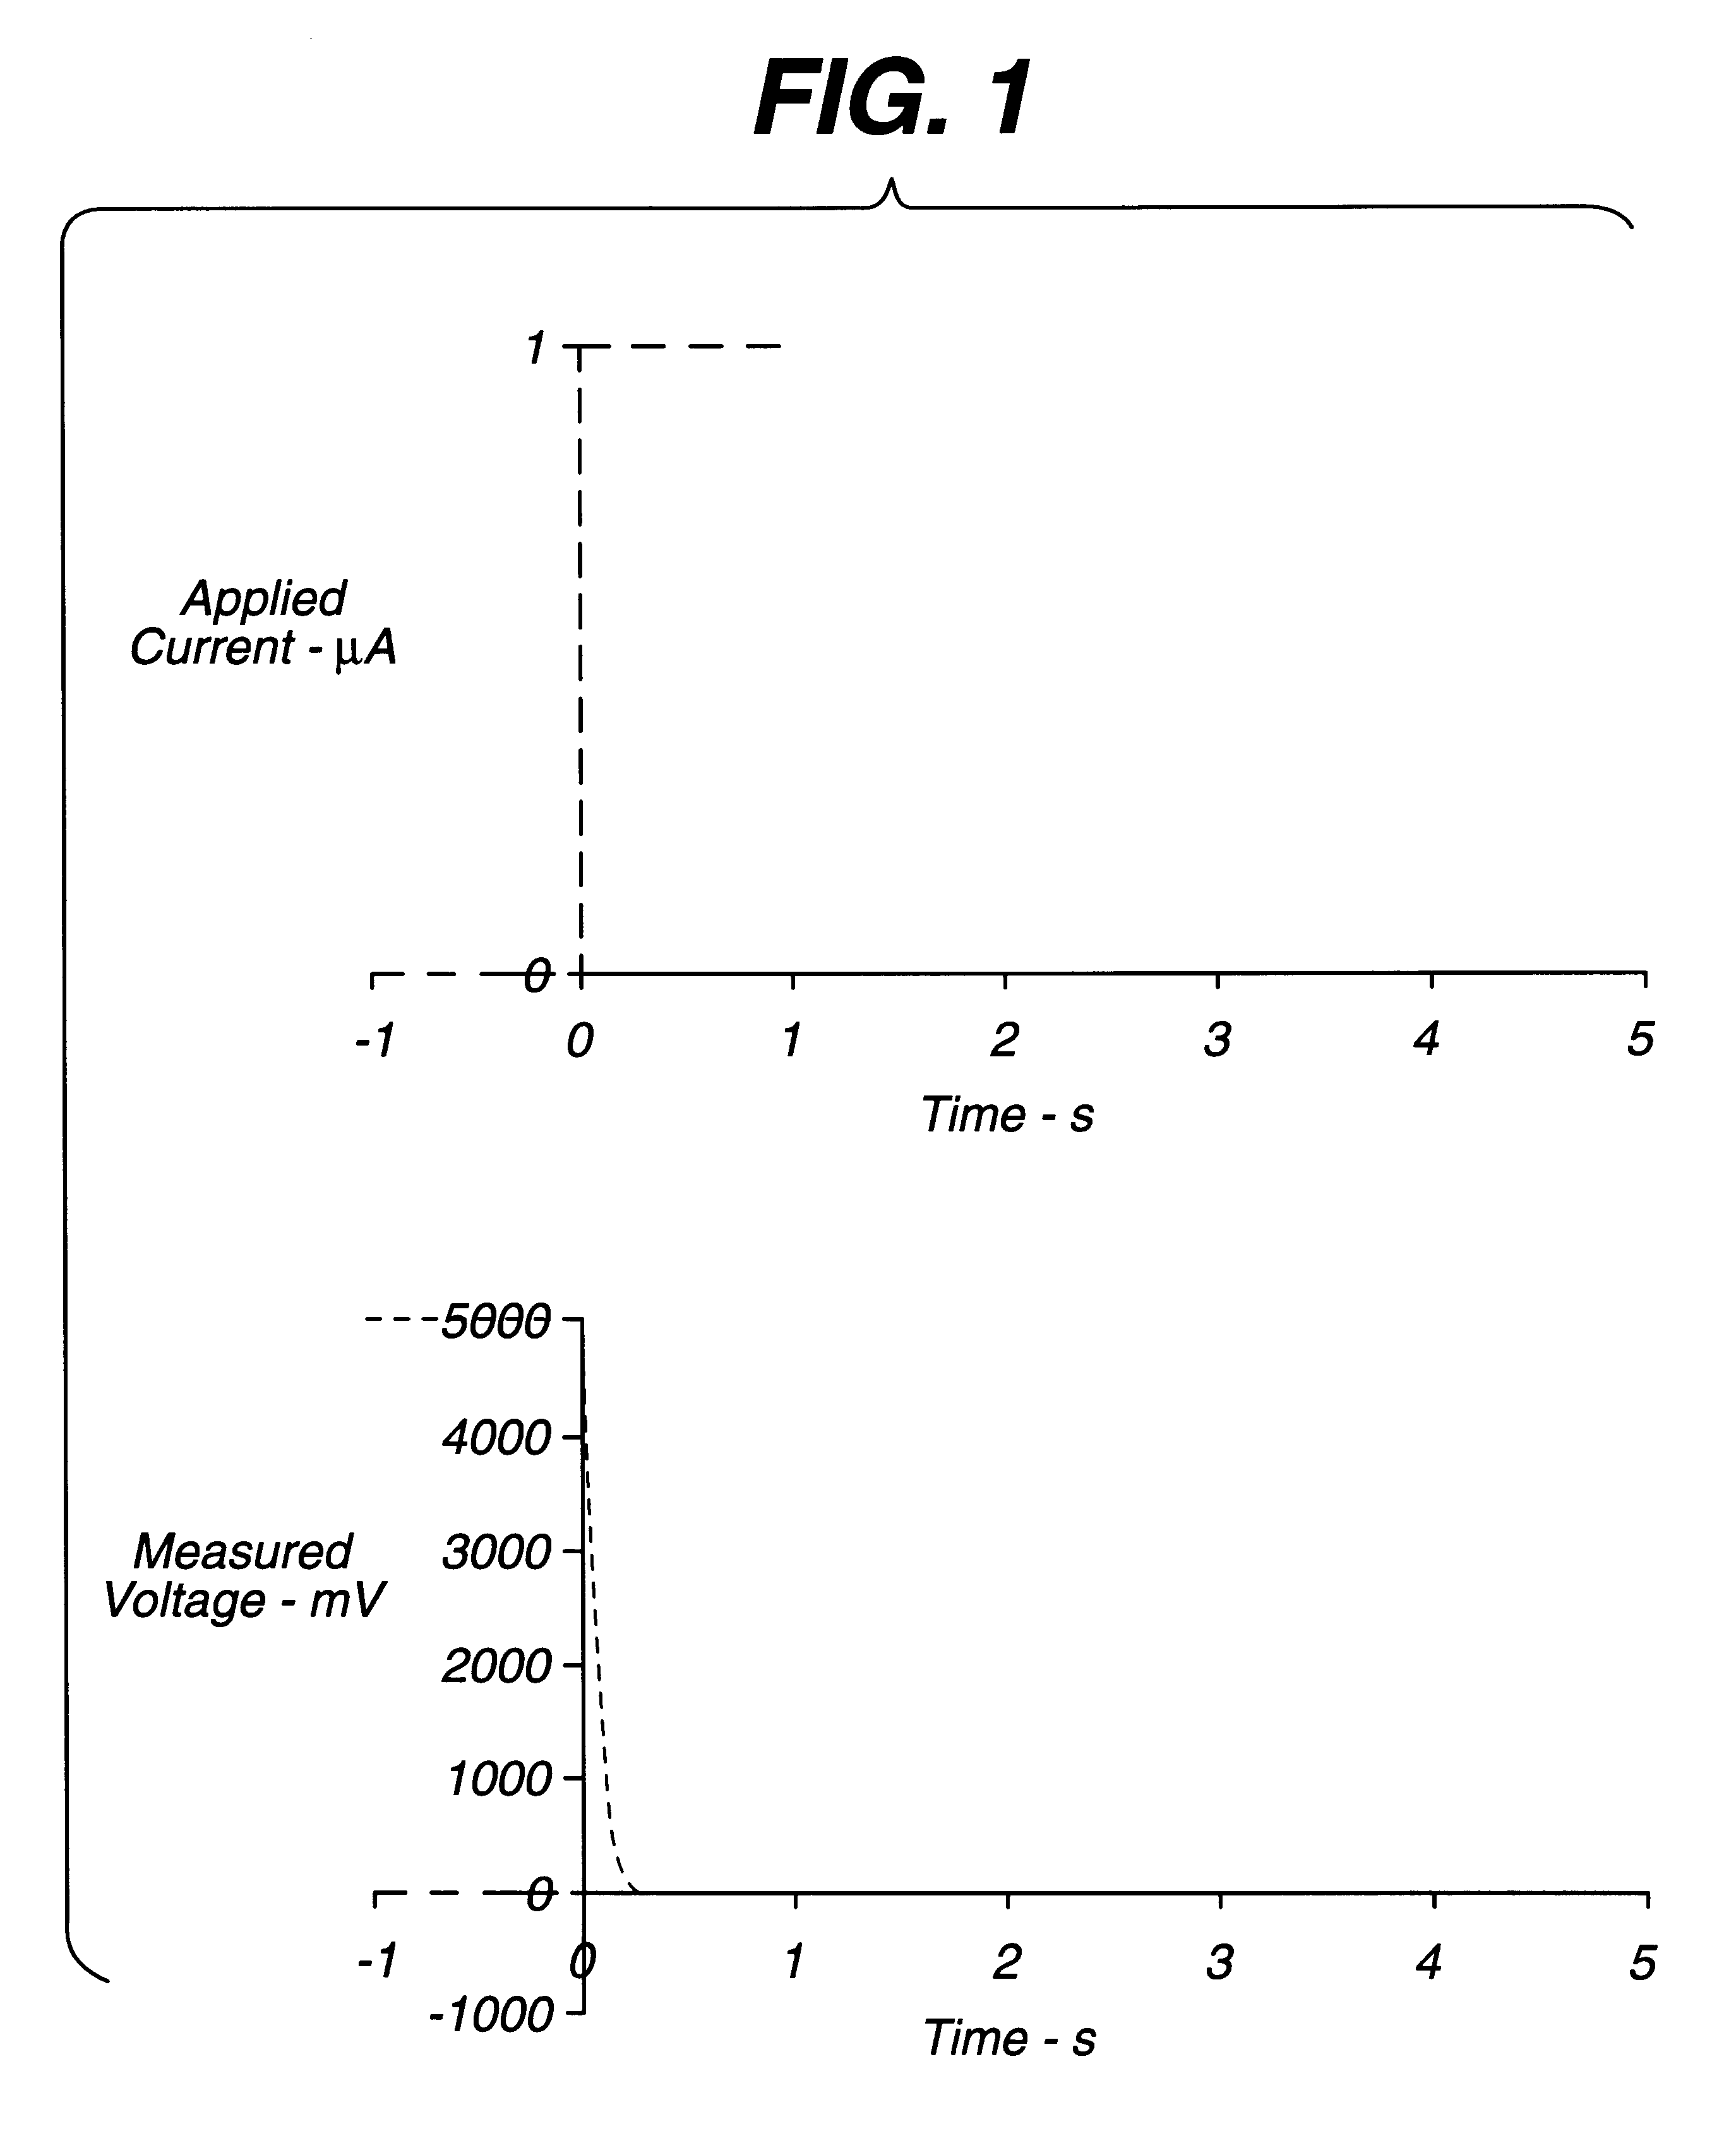 Sample detection to initiate timing of an electrochemical assay